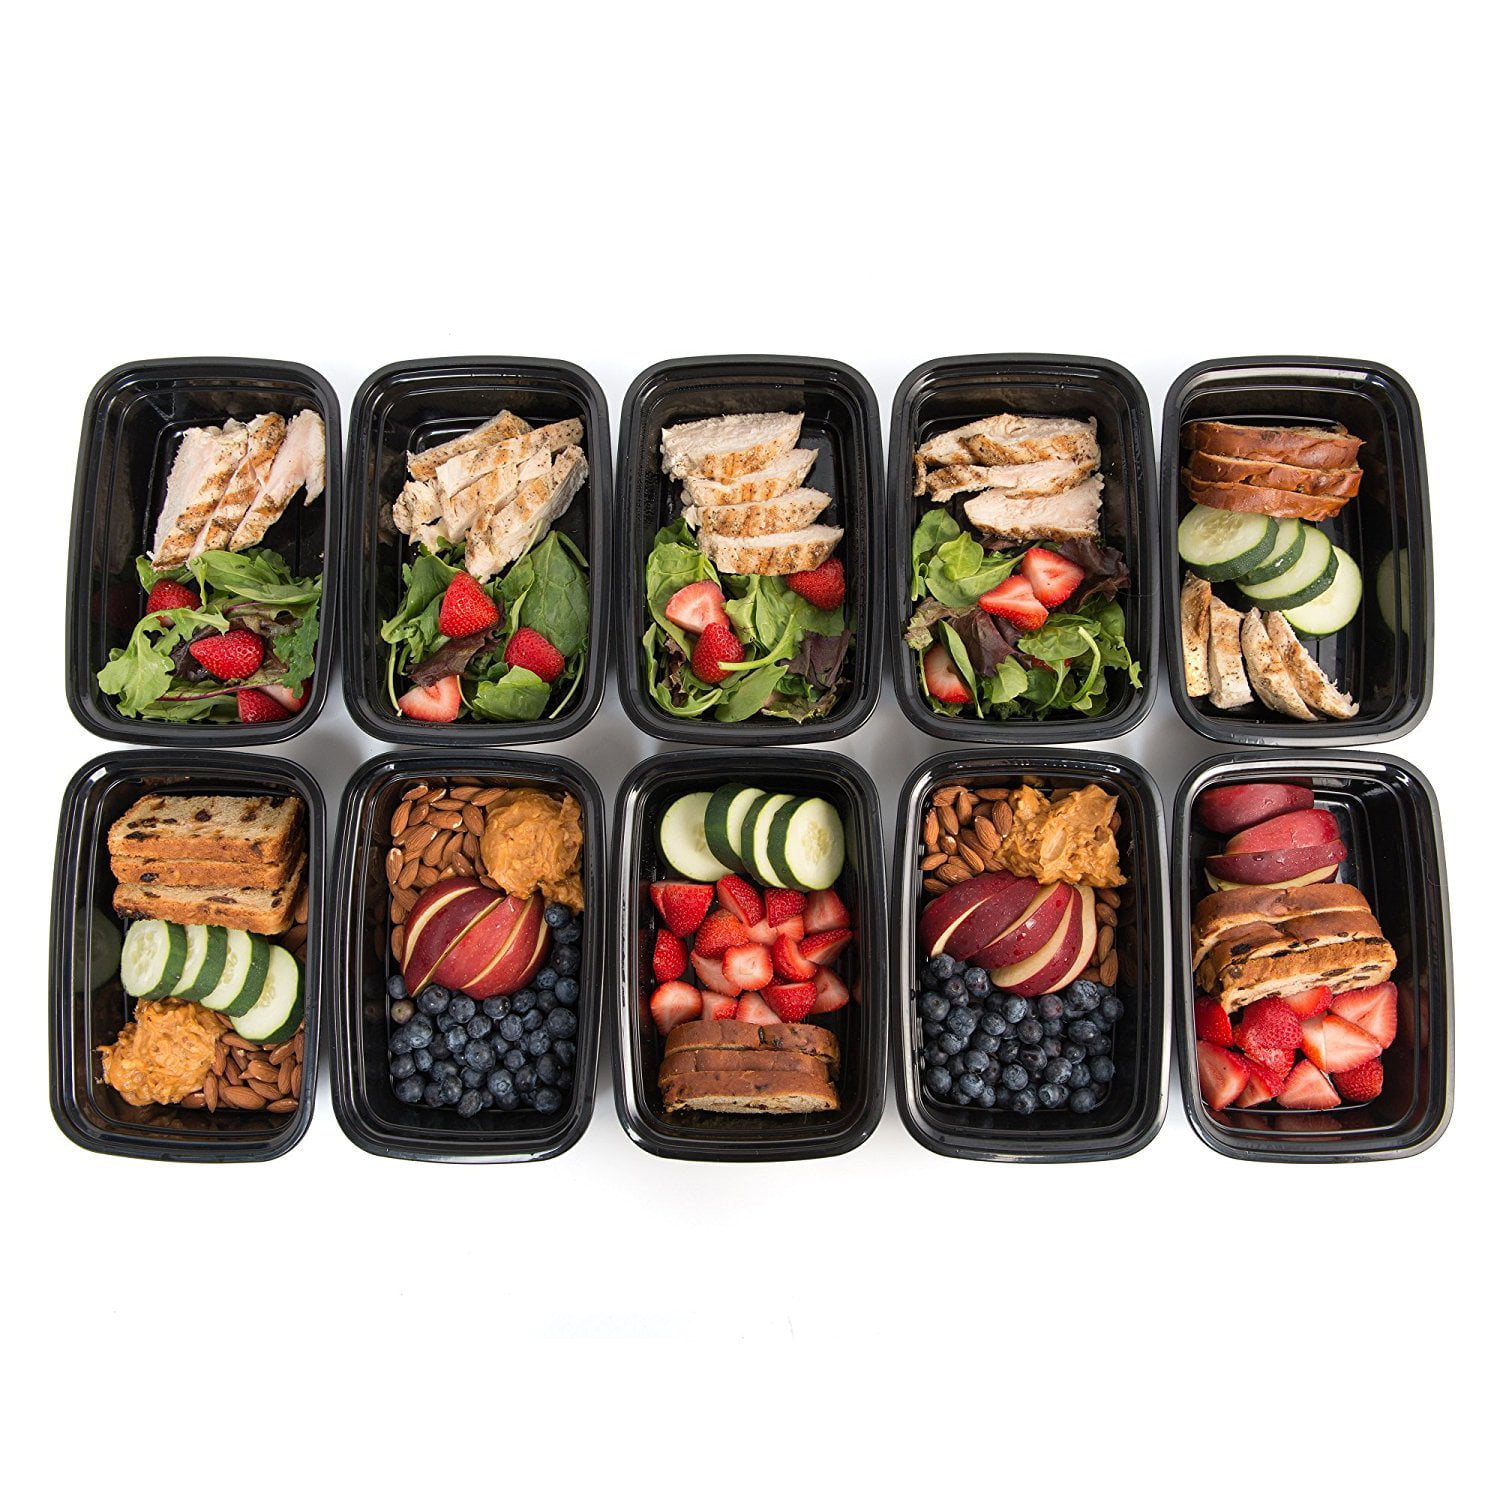 WGCC Meal Prep Containers with Lids - 10Pack 32oz Meal Prep Bowls, Disposable Food Prep Containers, Round to Go Containers with Lids, BPA-Free